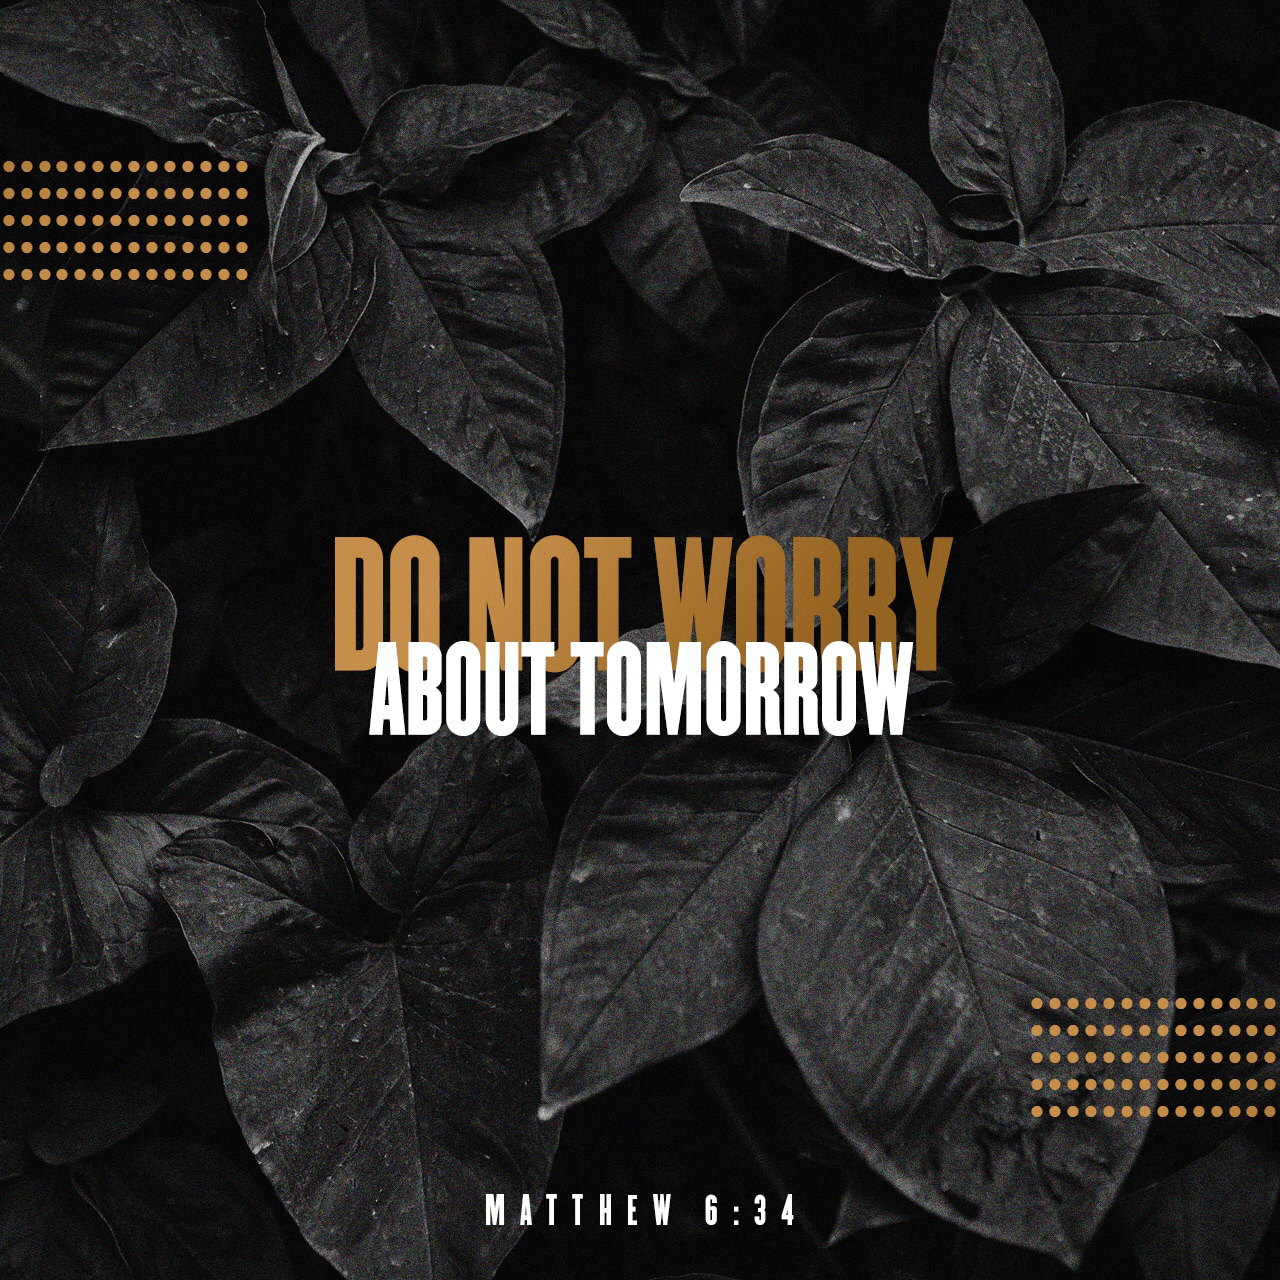 VOTD September 23 - So do not worry about tomorrow; for tomorrow will care for itself. Each day has enough trouble of its own. Matthew‬ ‭6:34‬ ‭NASB